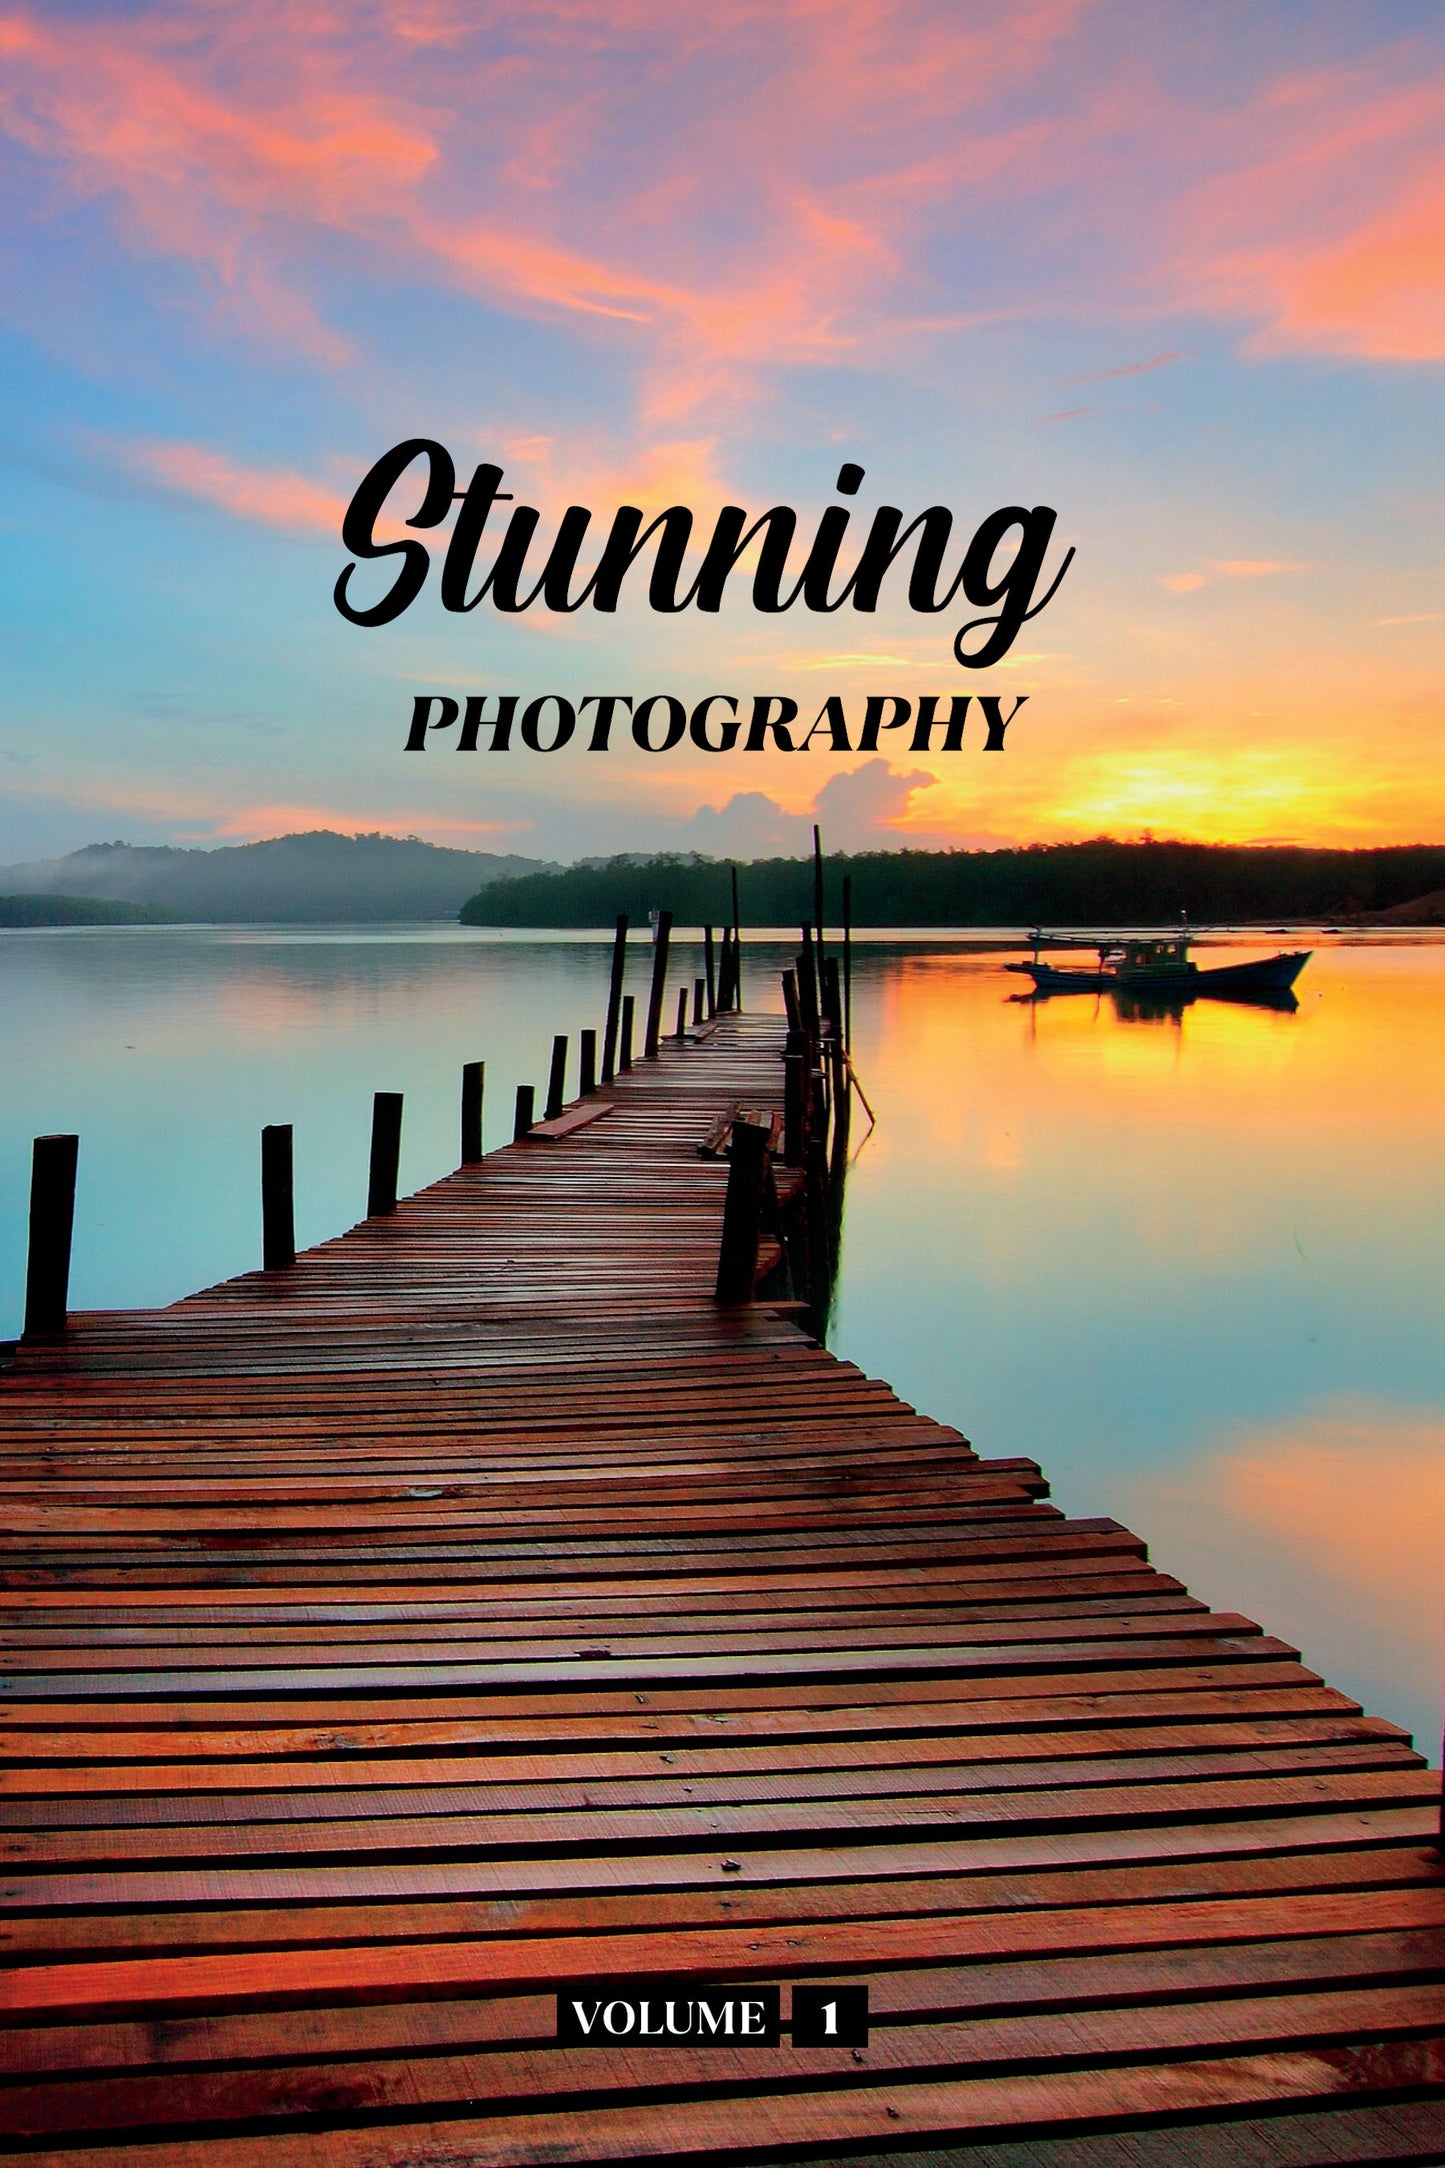 Stunning Photography Volume 1 (Physical Book)